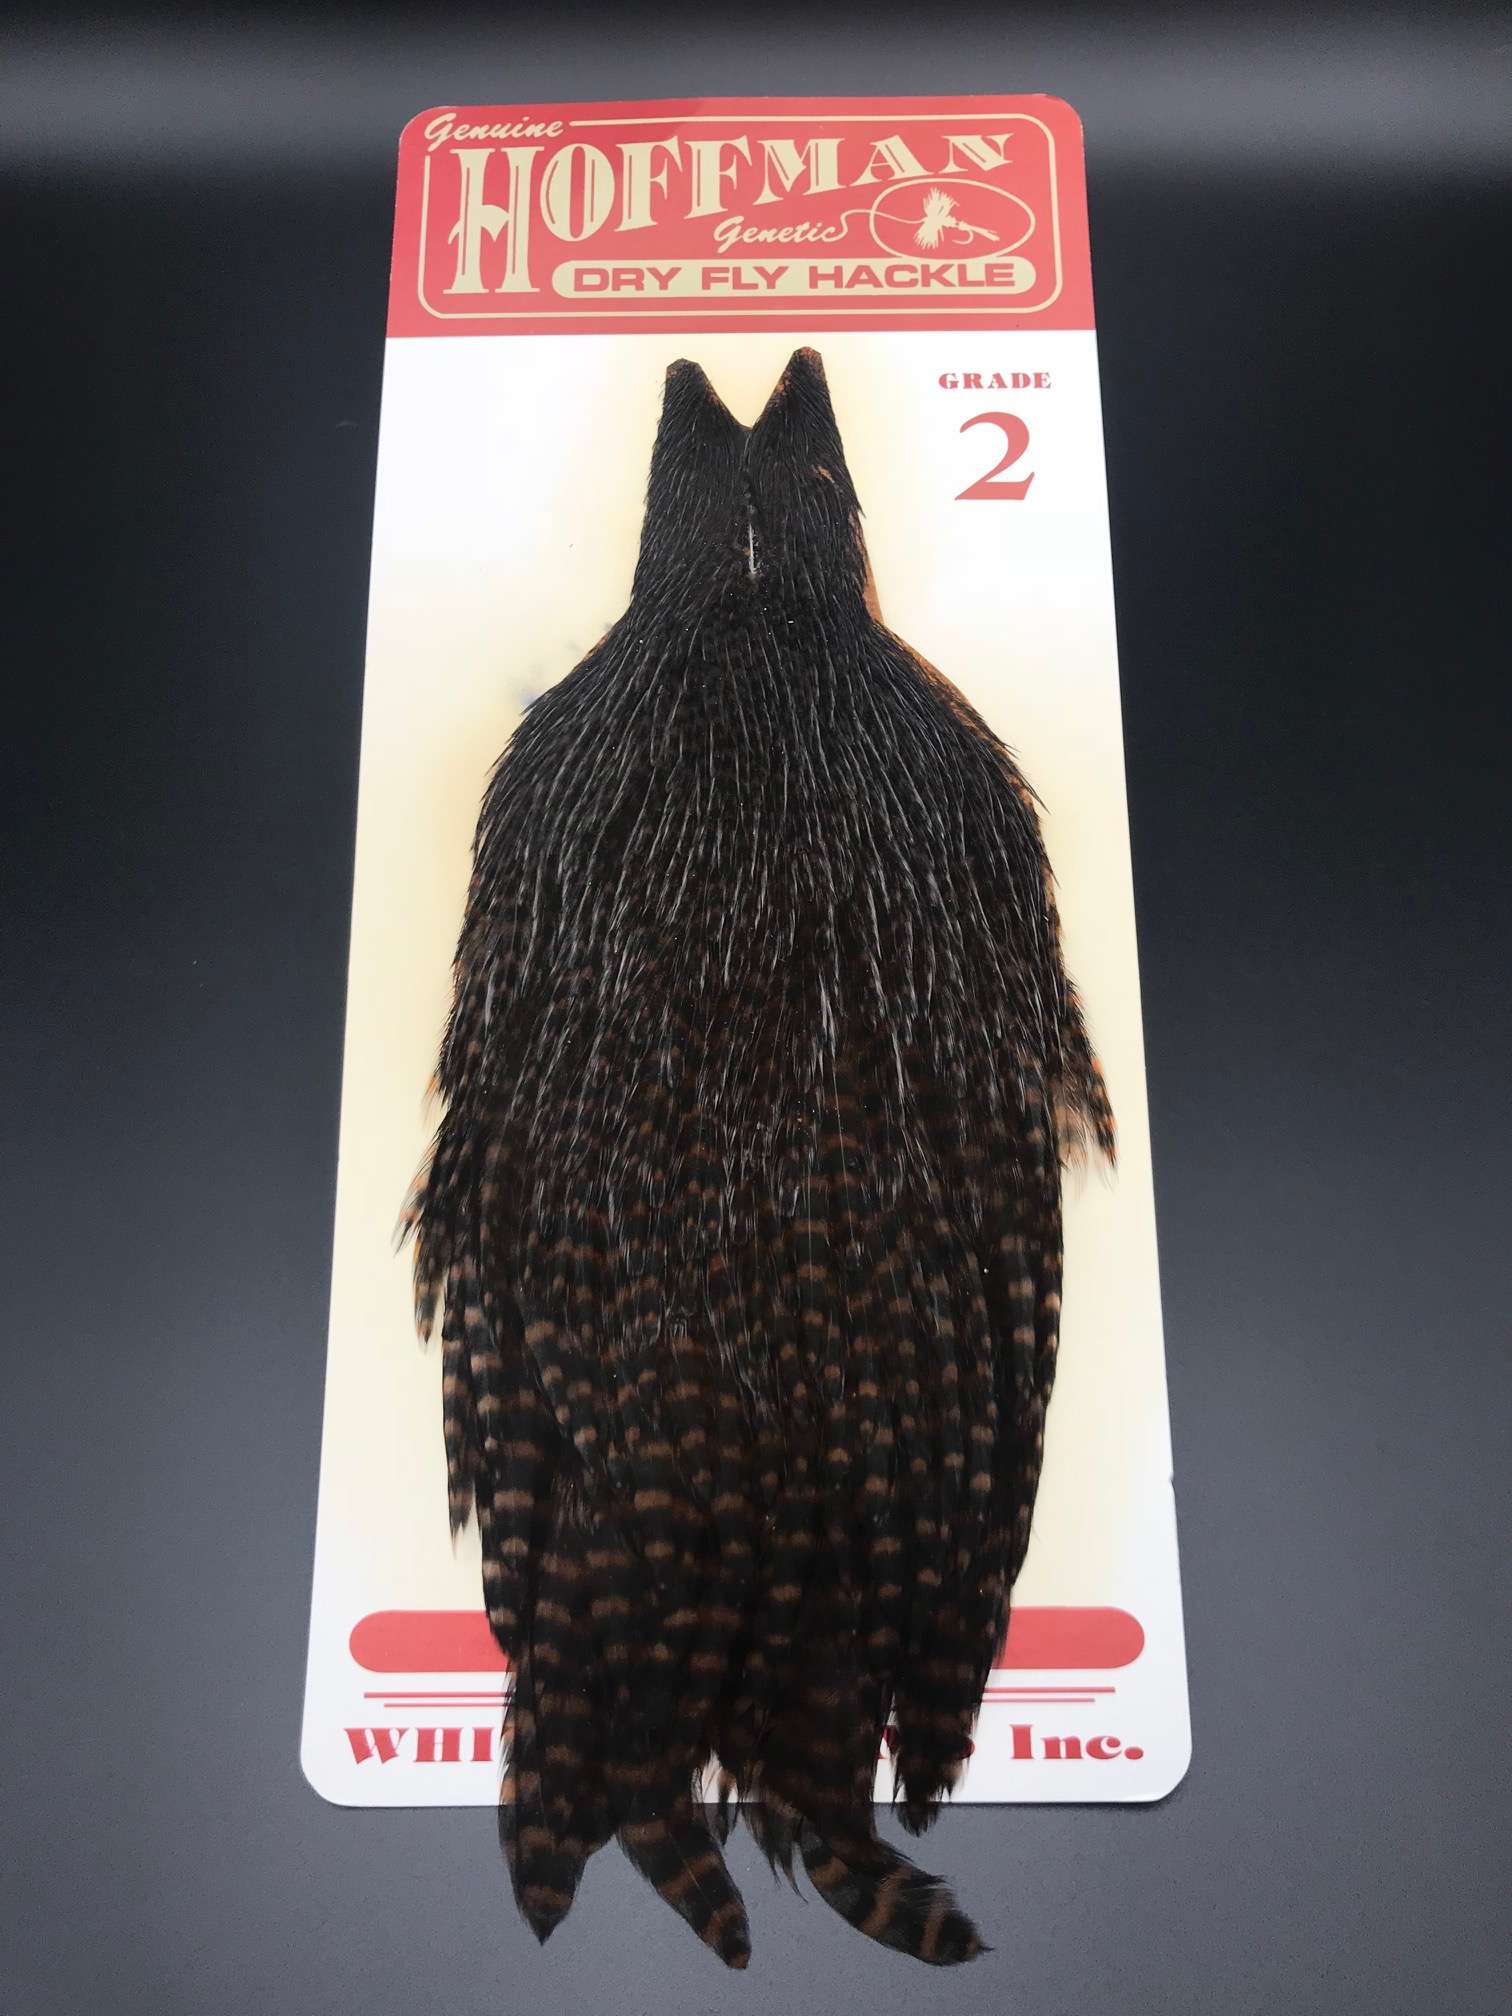 Hoffman Saddle Hackle Pack by Whiting Farms - Wilkinson Fly Fishing LLC